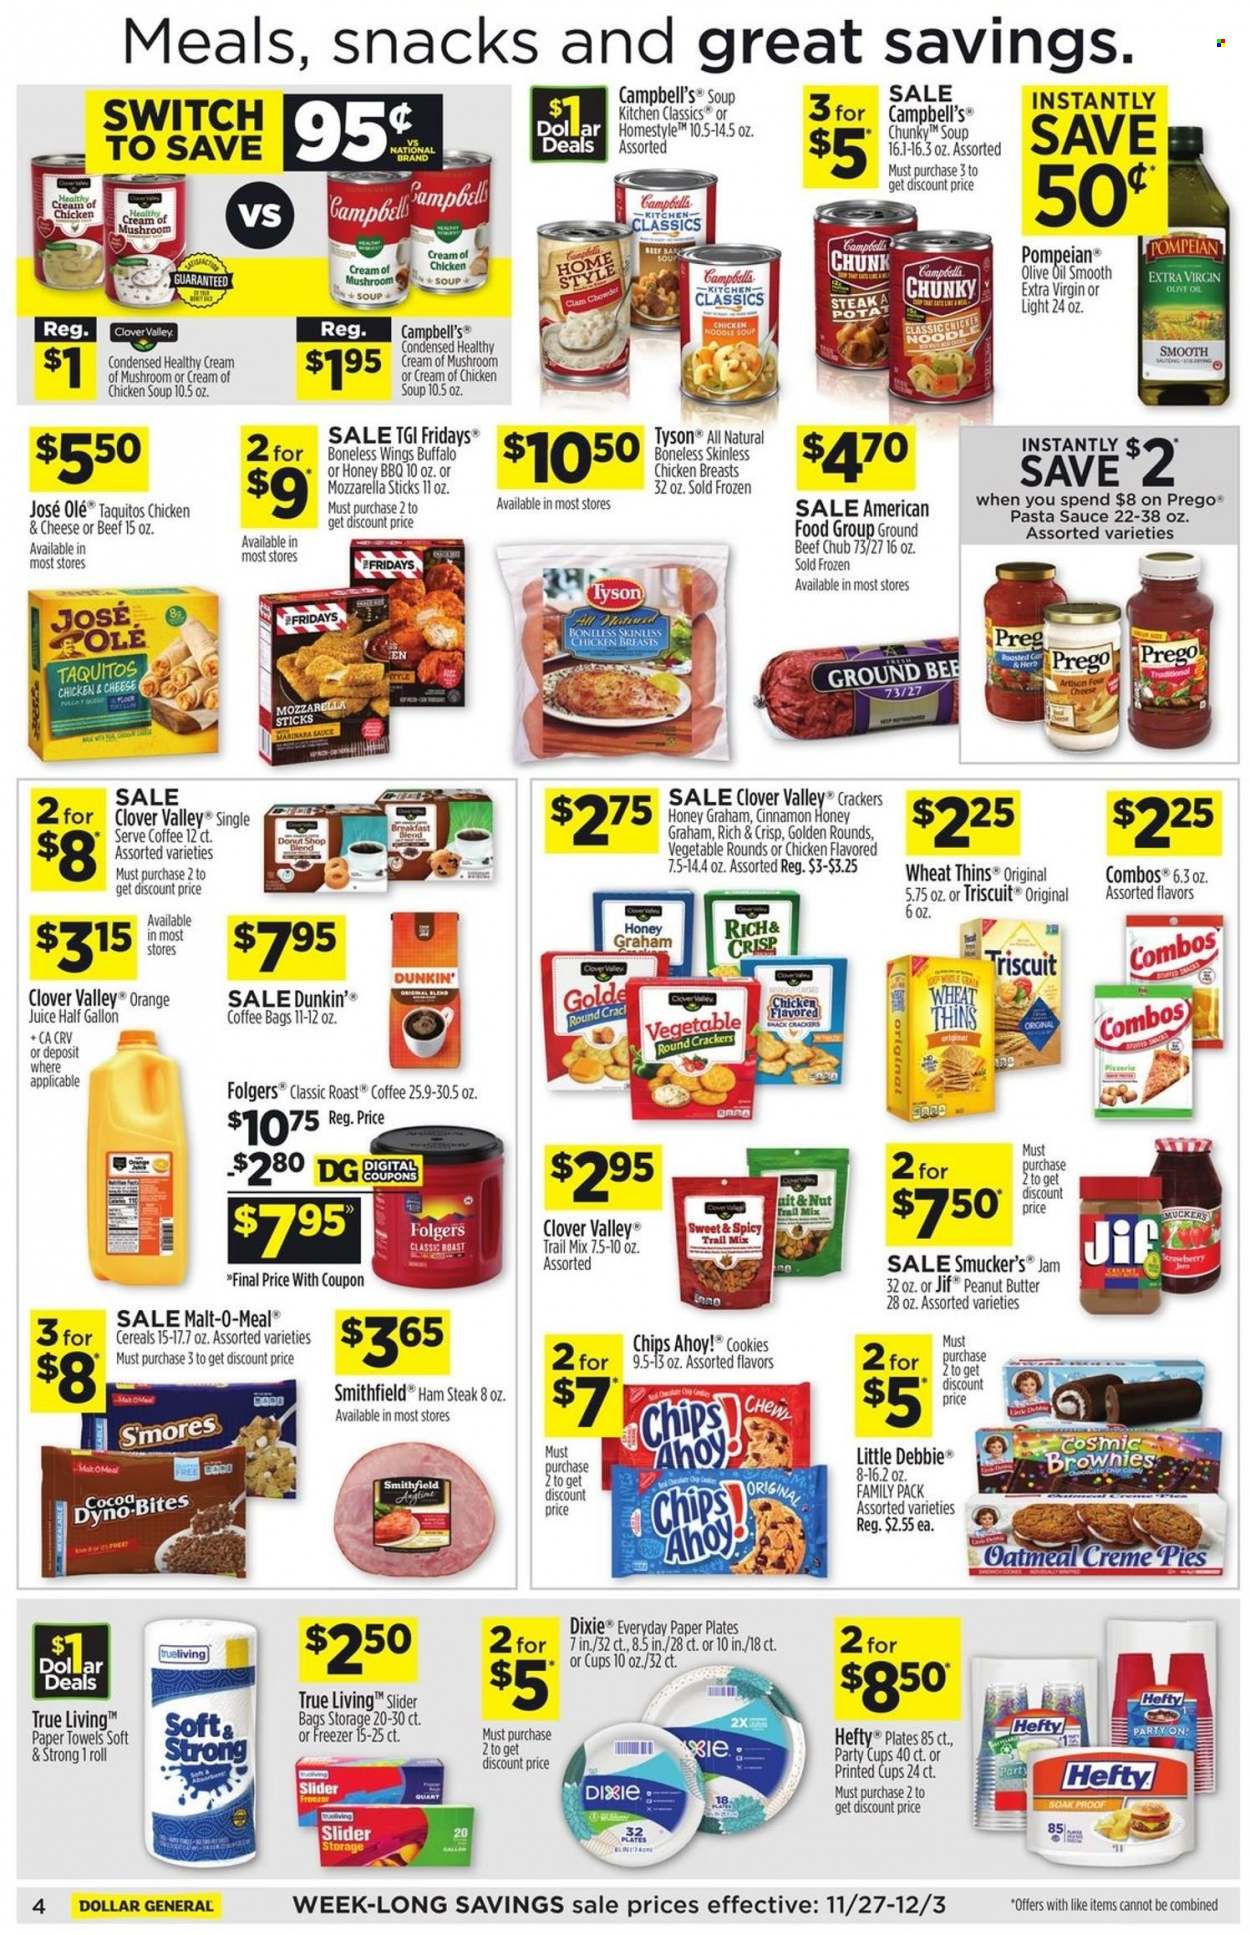 thumbnail - Dollar General Flyer - 11/27/2022 - 12/03/2022 - Sales products - brownies, Campbell's, mushroom soup, pasta sauce, chicken soup, soup, sauce, taquitos, ham, ham steaks, mozzarella, Clover, cookies, Dove, snack, crackers, Chips Ahoy!, Thins, cocoa, oatmeal, malt, clam chowder, cereals, cinnamon, extra virgin olive oil, olive oil, oil, fruit jam, peanut butter, Jif, trail mix, orange juice, juice, coffee, Folgers, chicken breasts, beef meat, ground beef, steak, kitchen towels, paper towels, Hefty, Dixie, plate, cup, pen, paper plate, party cups, freezer. Page 3.